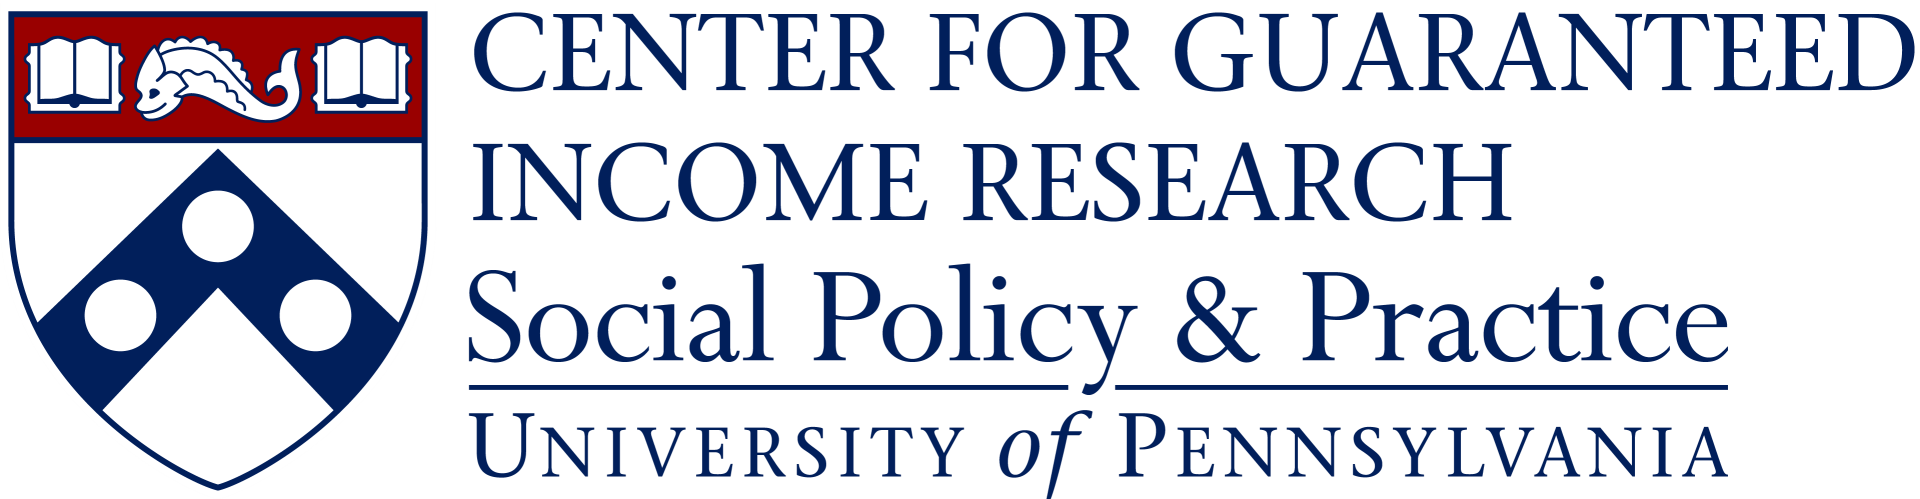 Center for Guaranteed Income Research - Social Policy & Practice (University of Pennsylvania)